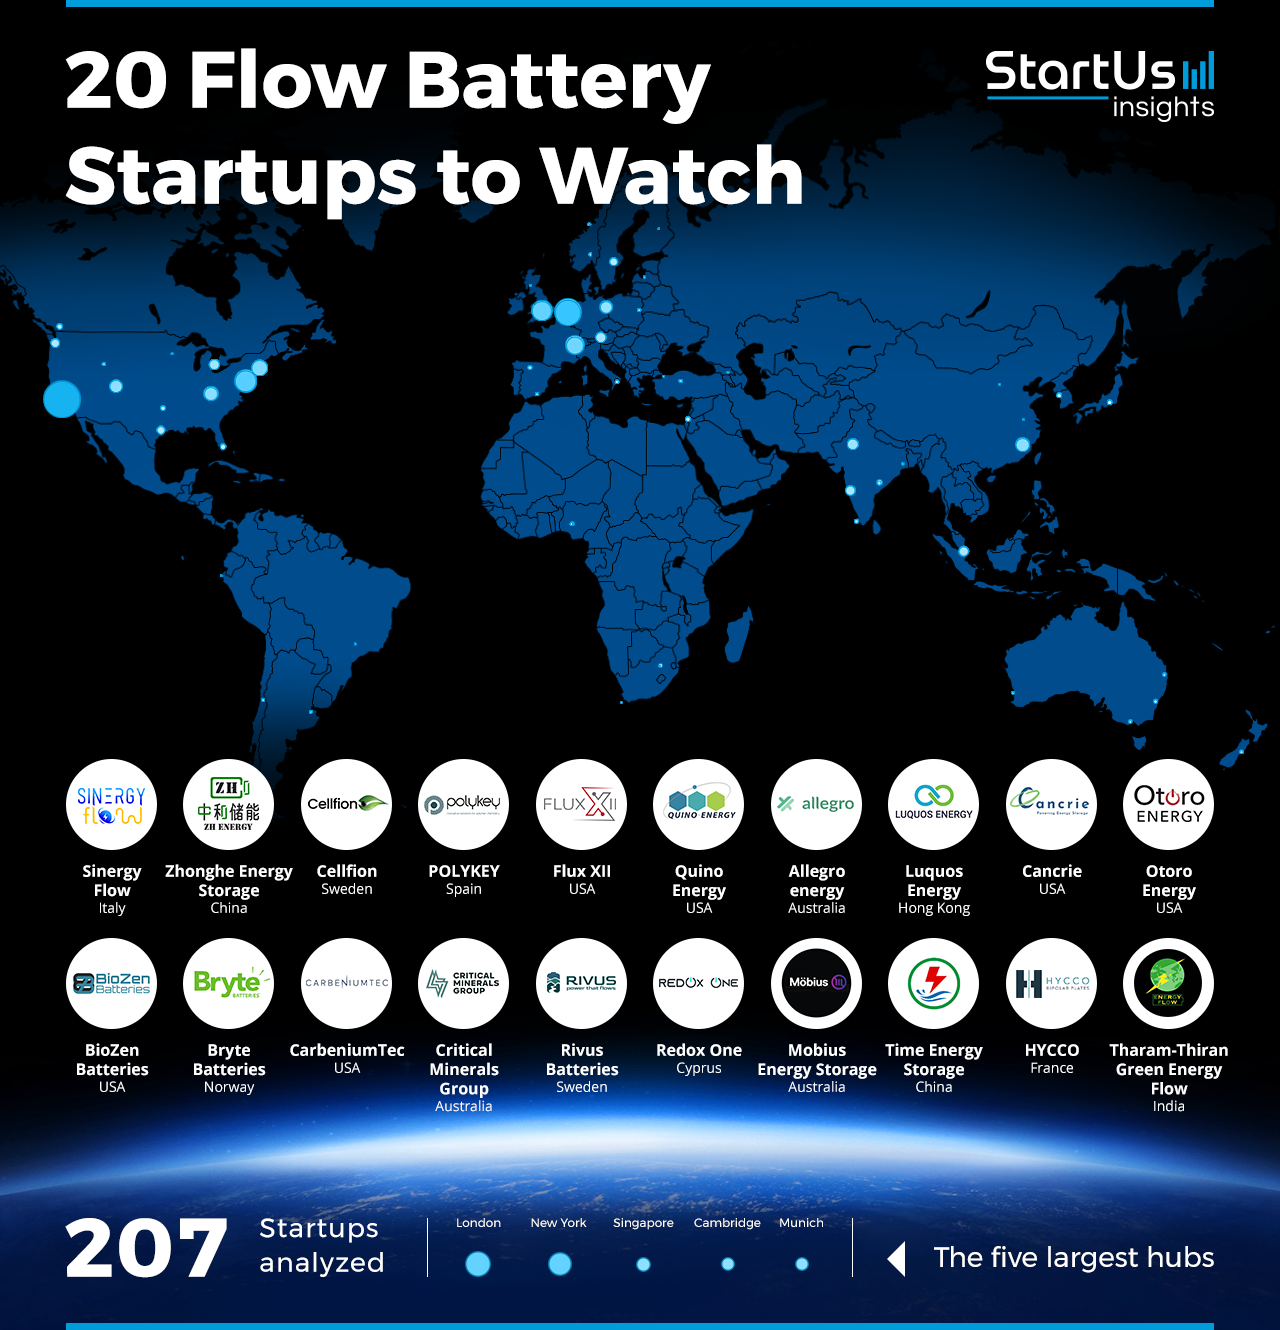 Flow-Battery-Startups-to-Watch-Heat-Map-StartUs-Insights